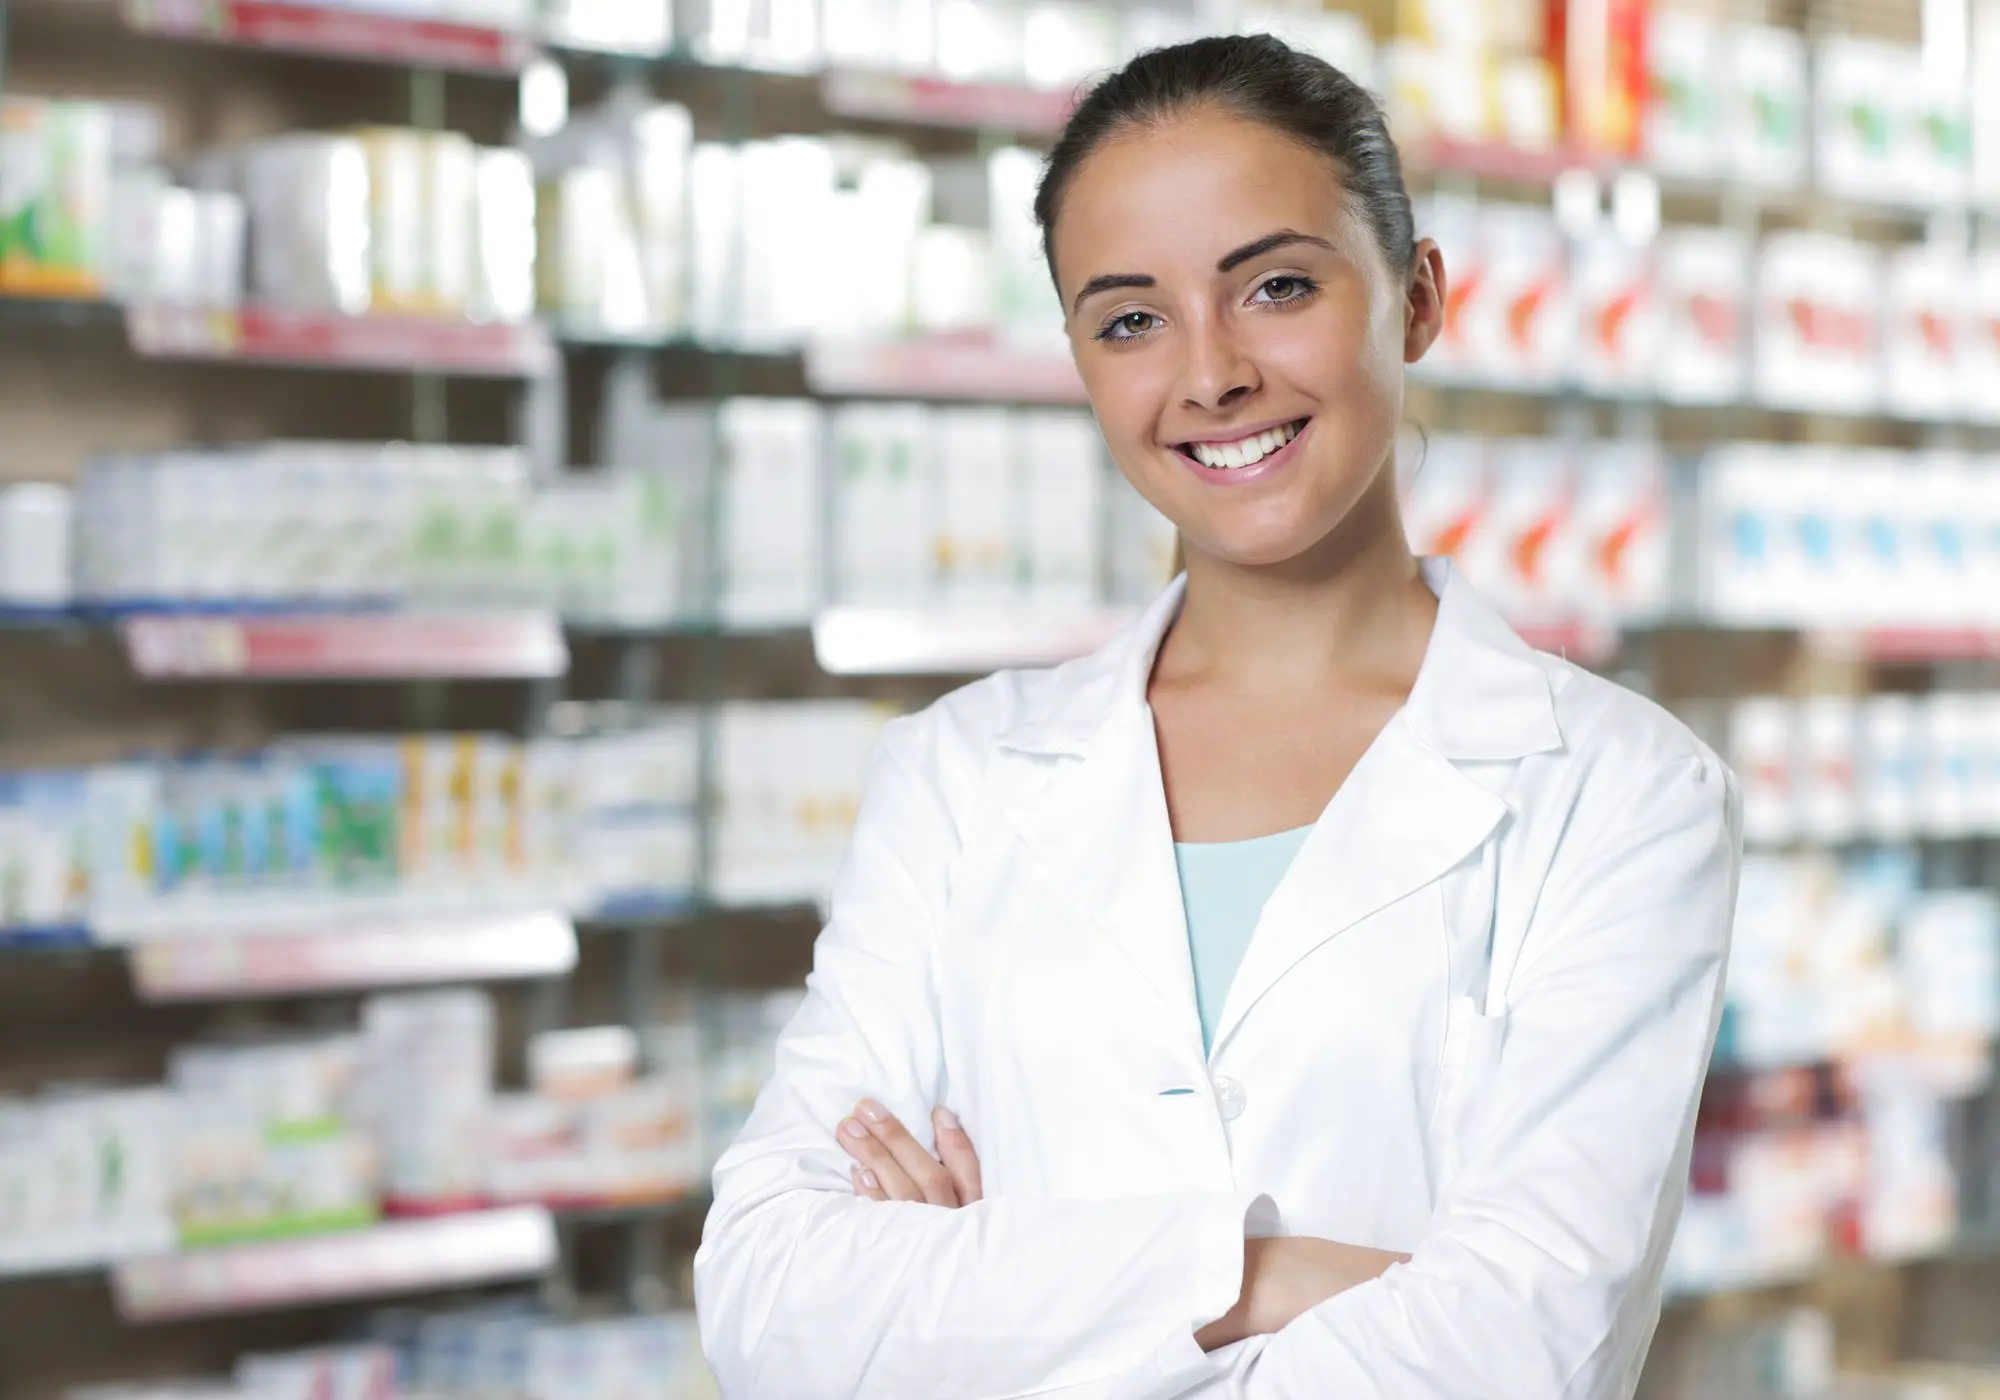 Pharmacist Interview Questions: 5 Tips for Nailing Your ...